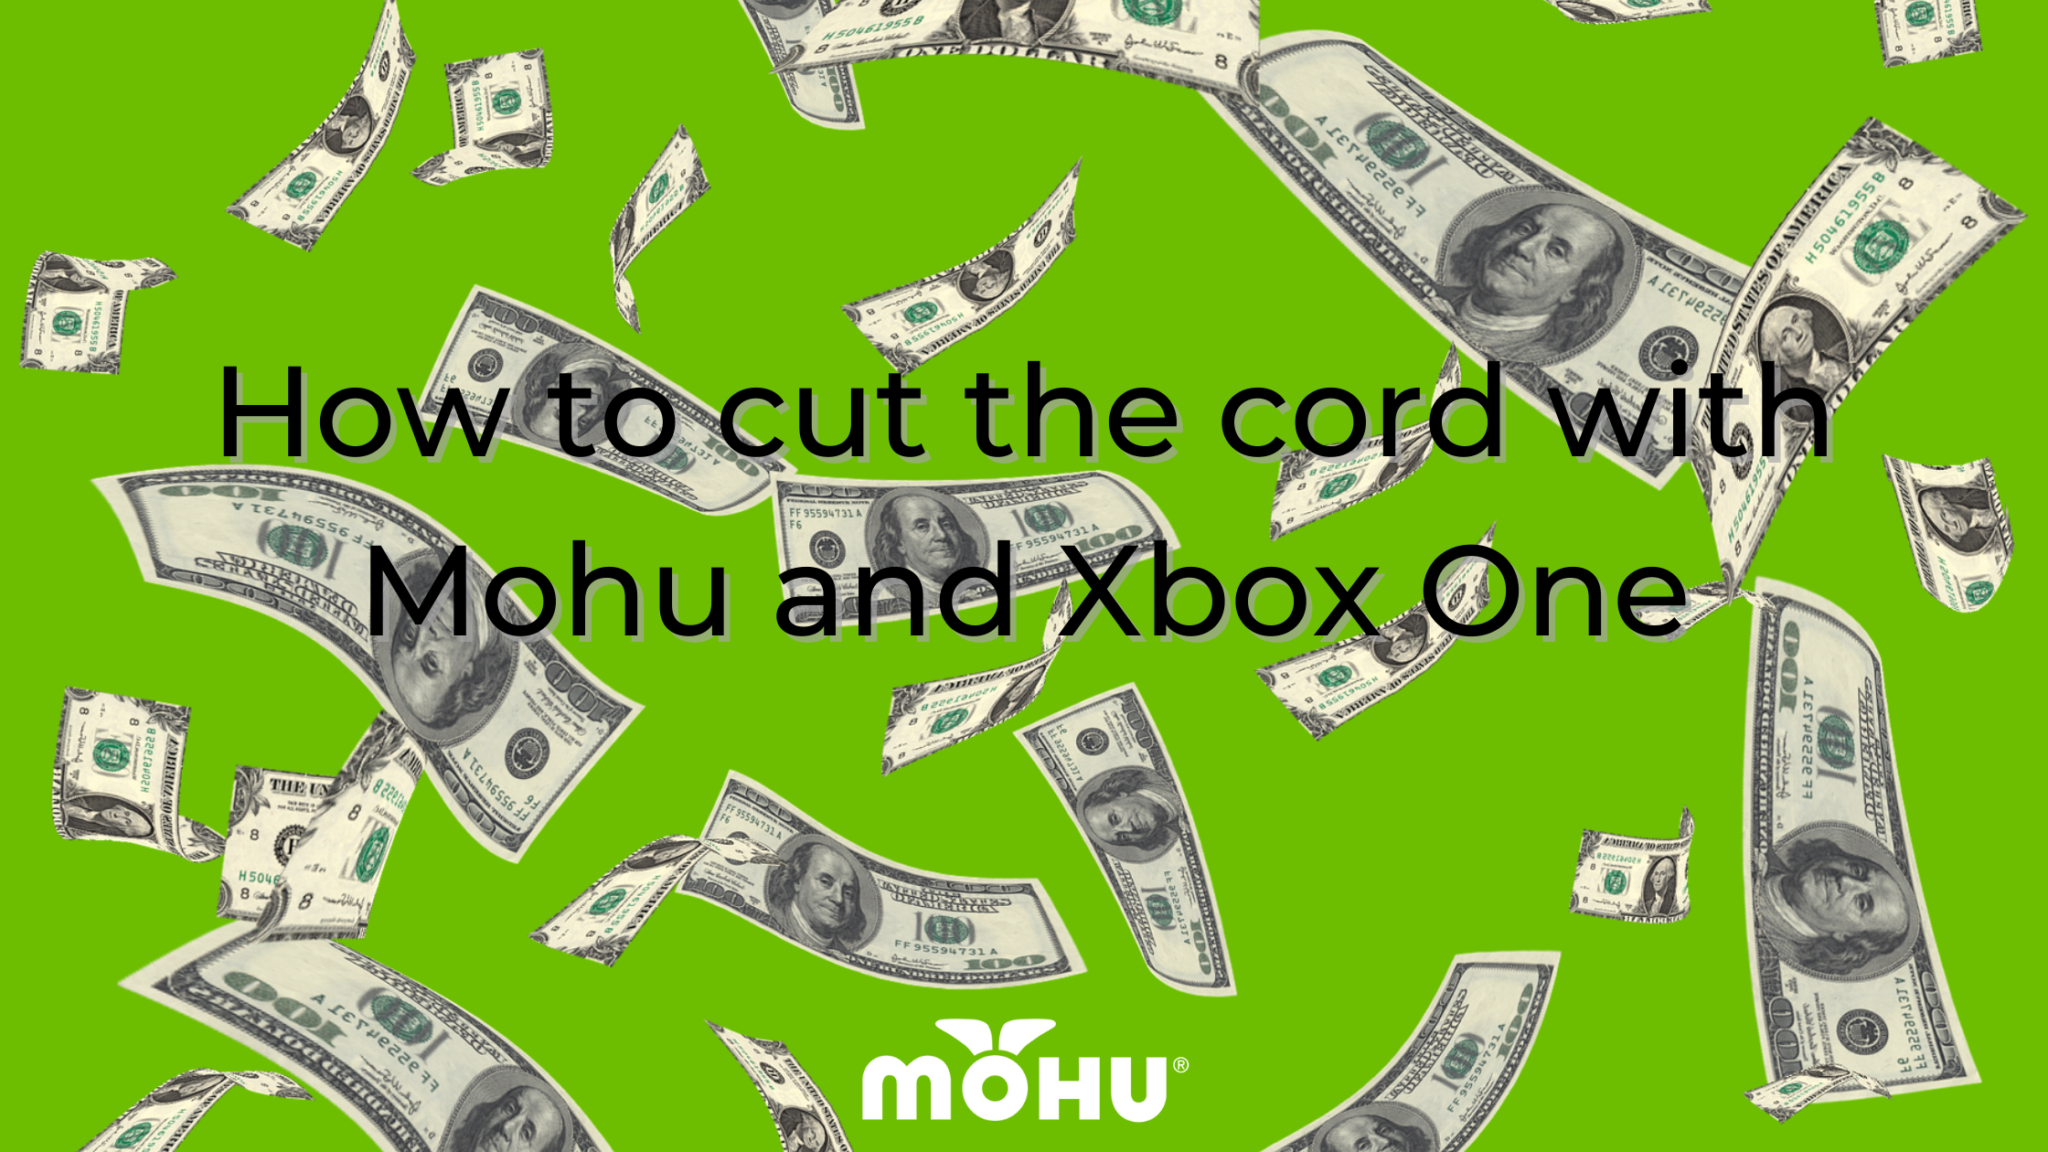 How To Cut The Cord With Mohu And Xbox One Mohu